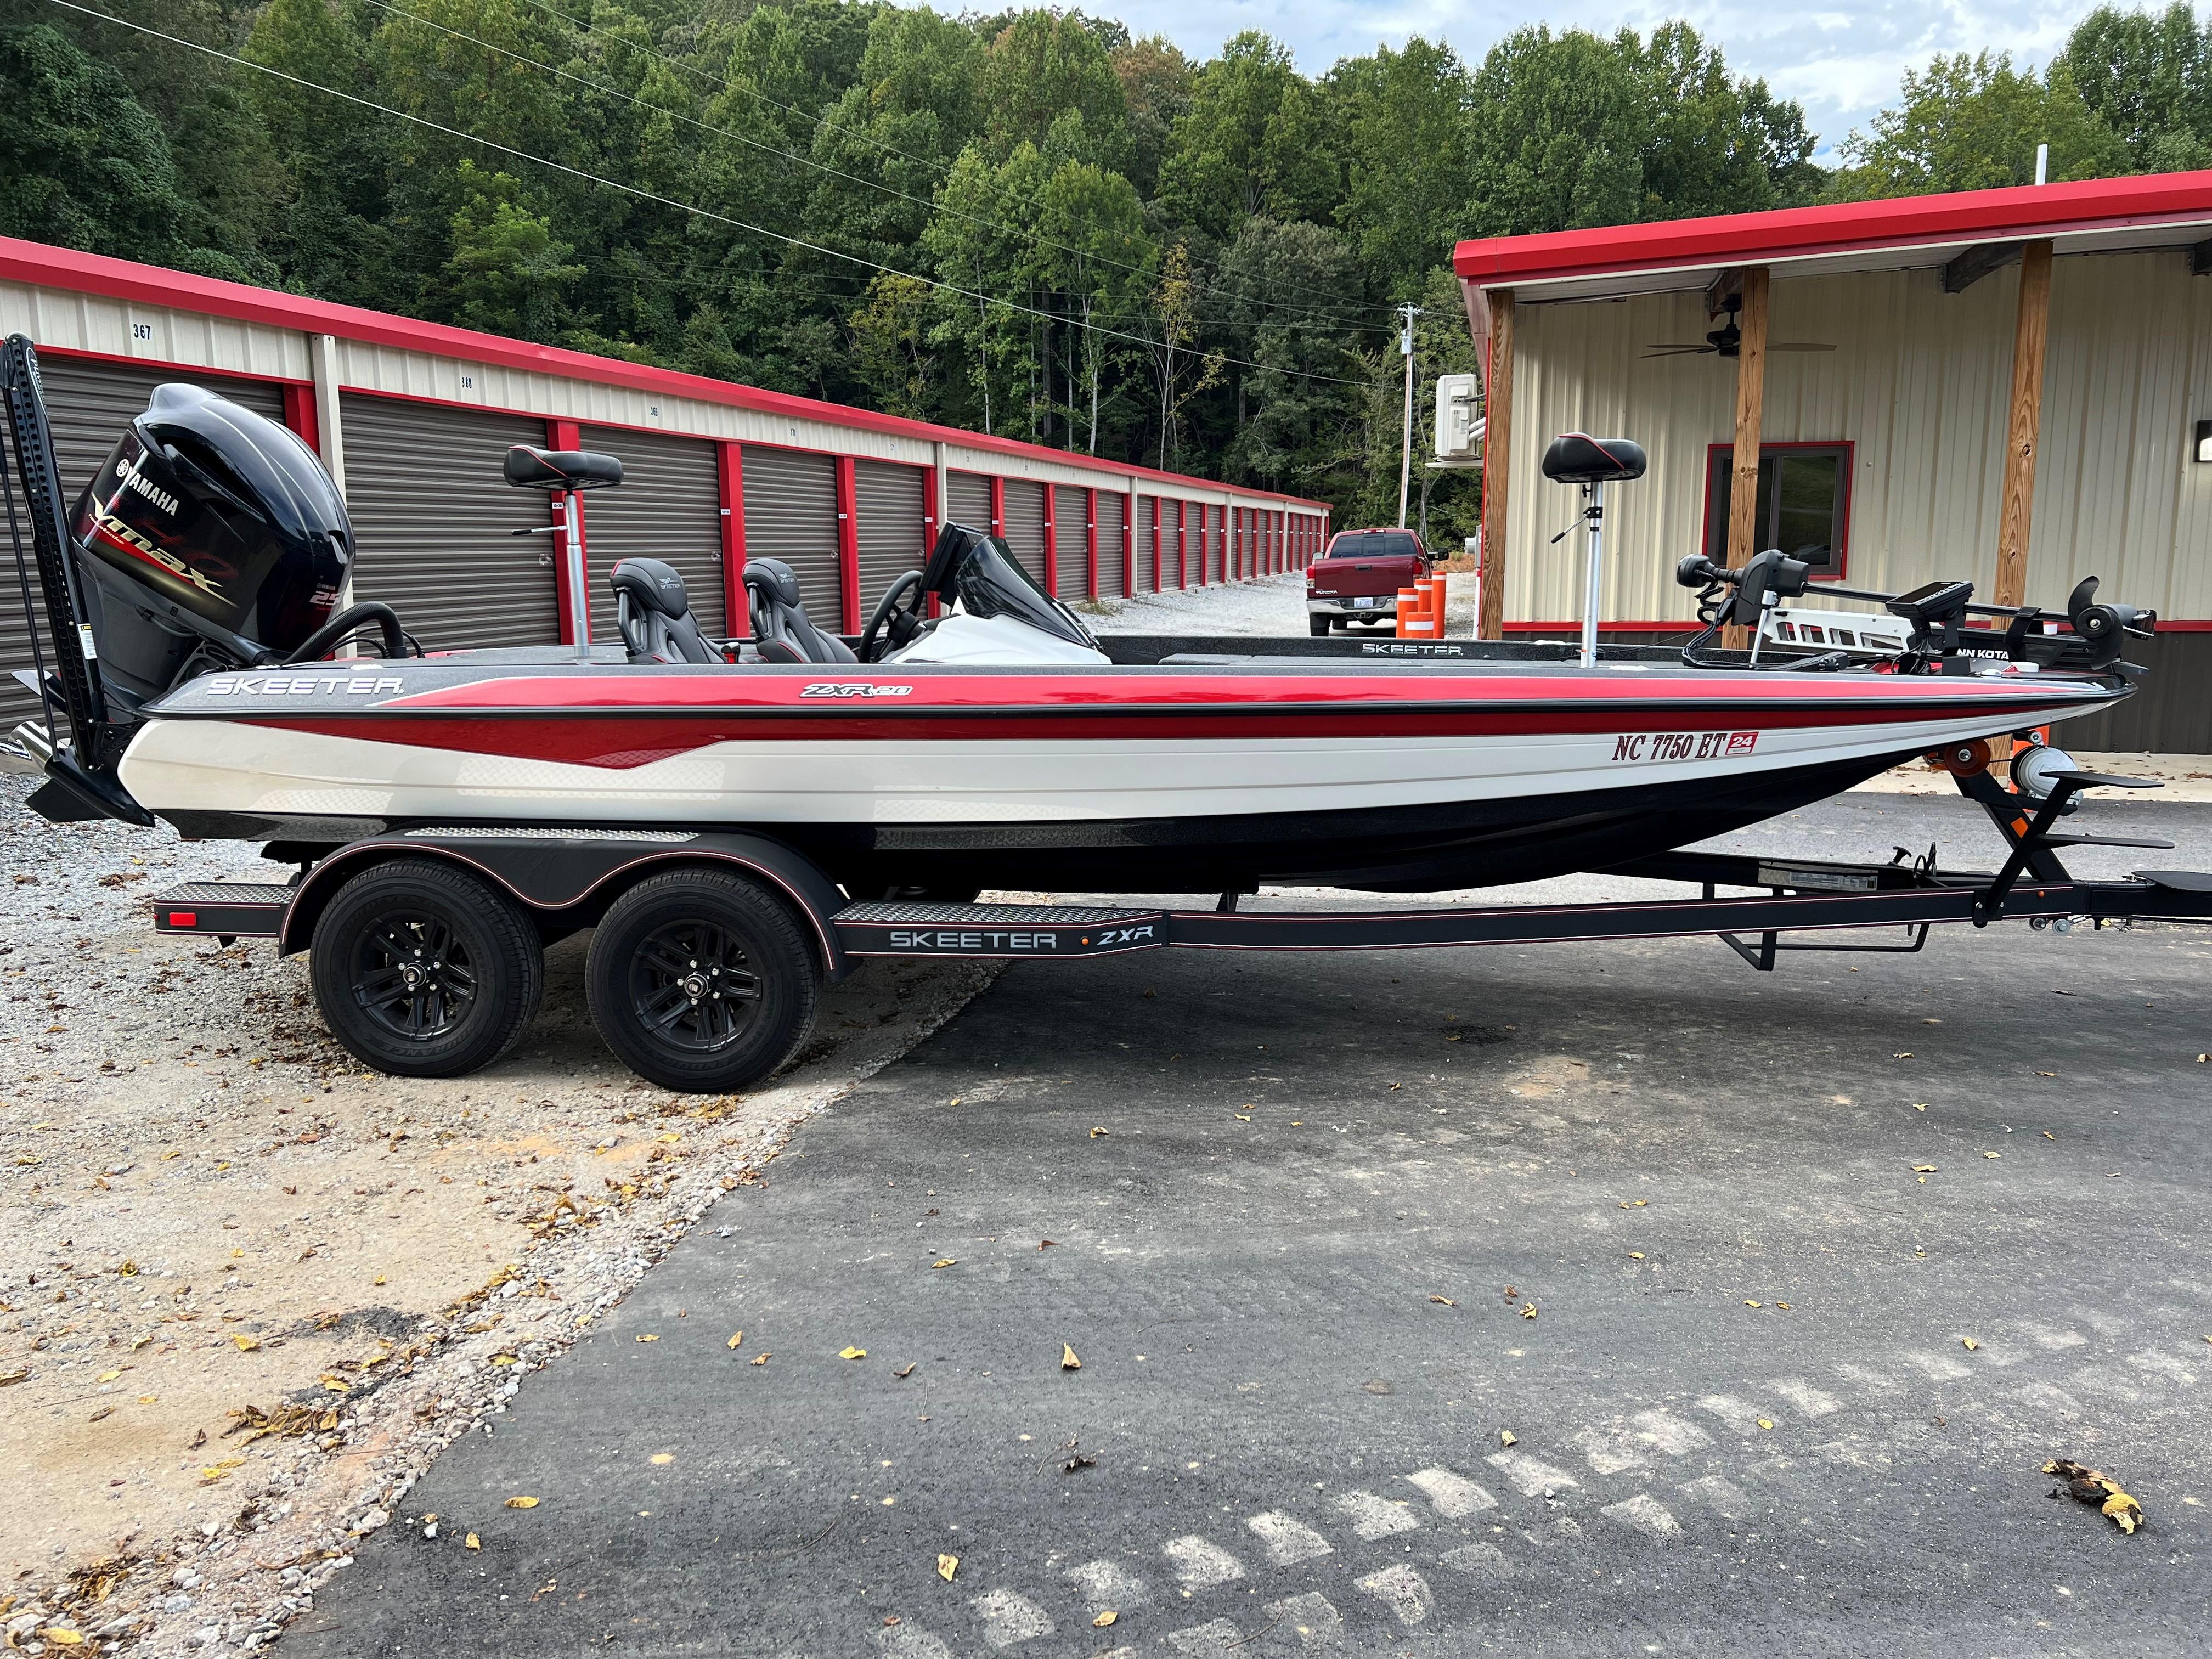 Bass boats for sale by owner - 4 of 9 pages - Boat Trader